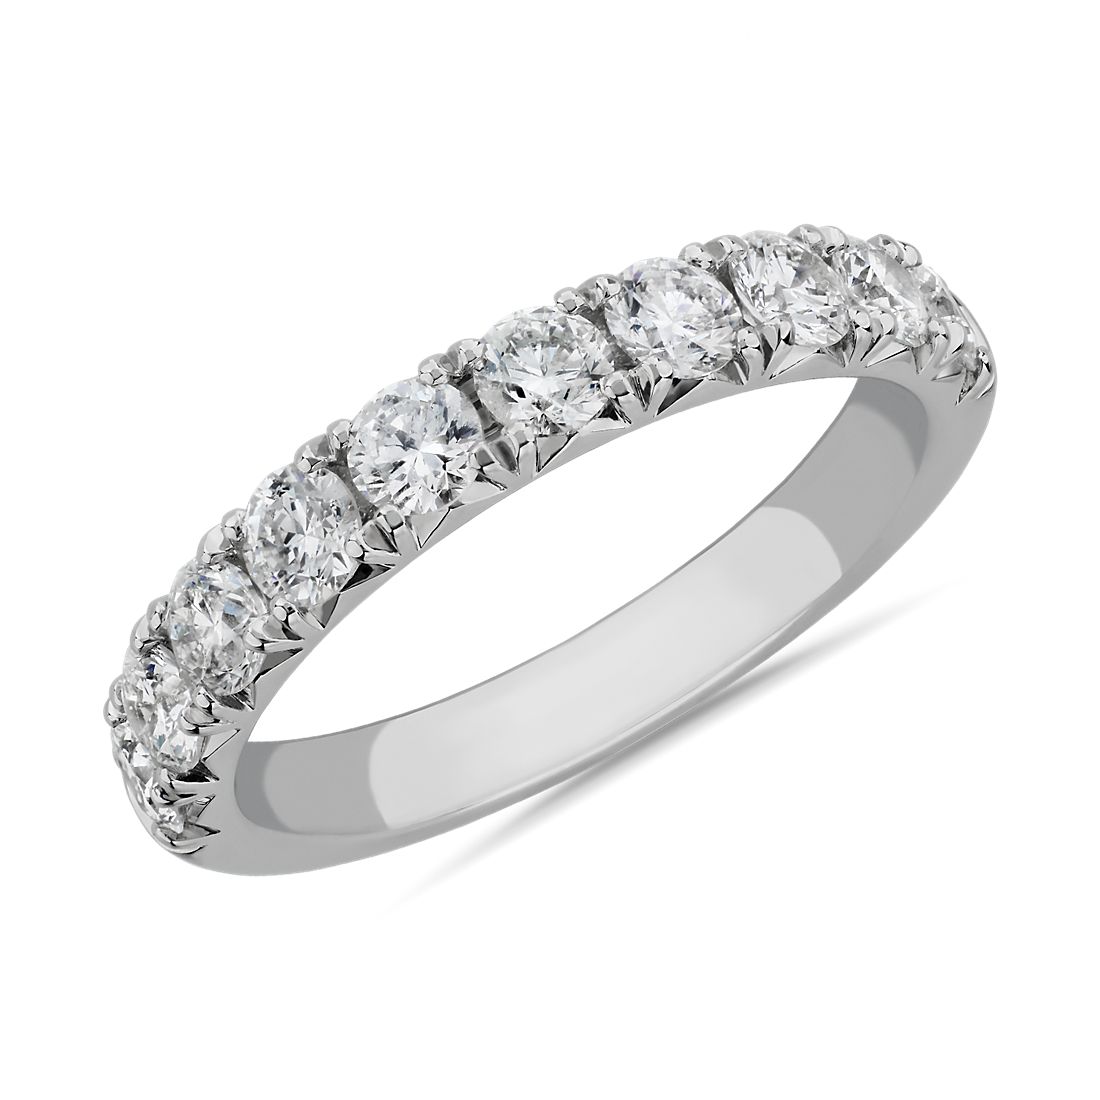 French Pavé Diamond Anniversary Band in 14k White Gold (0.97 ct. tw.)